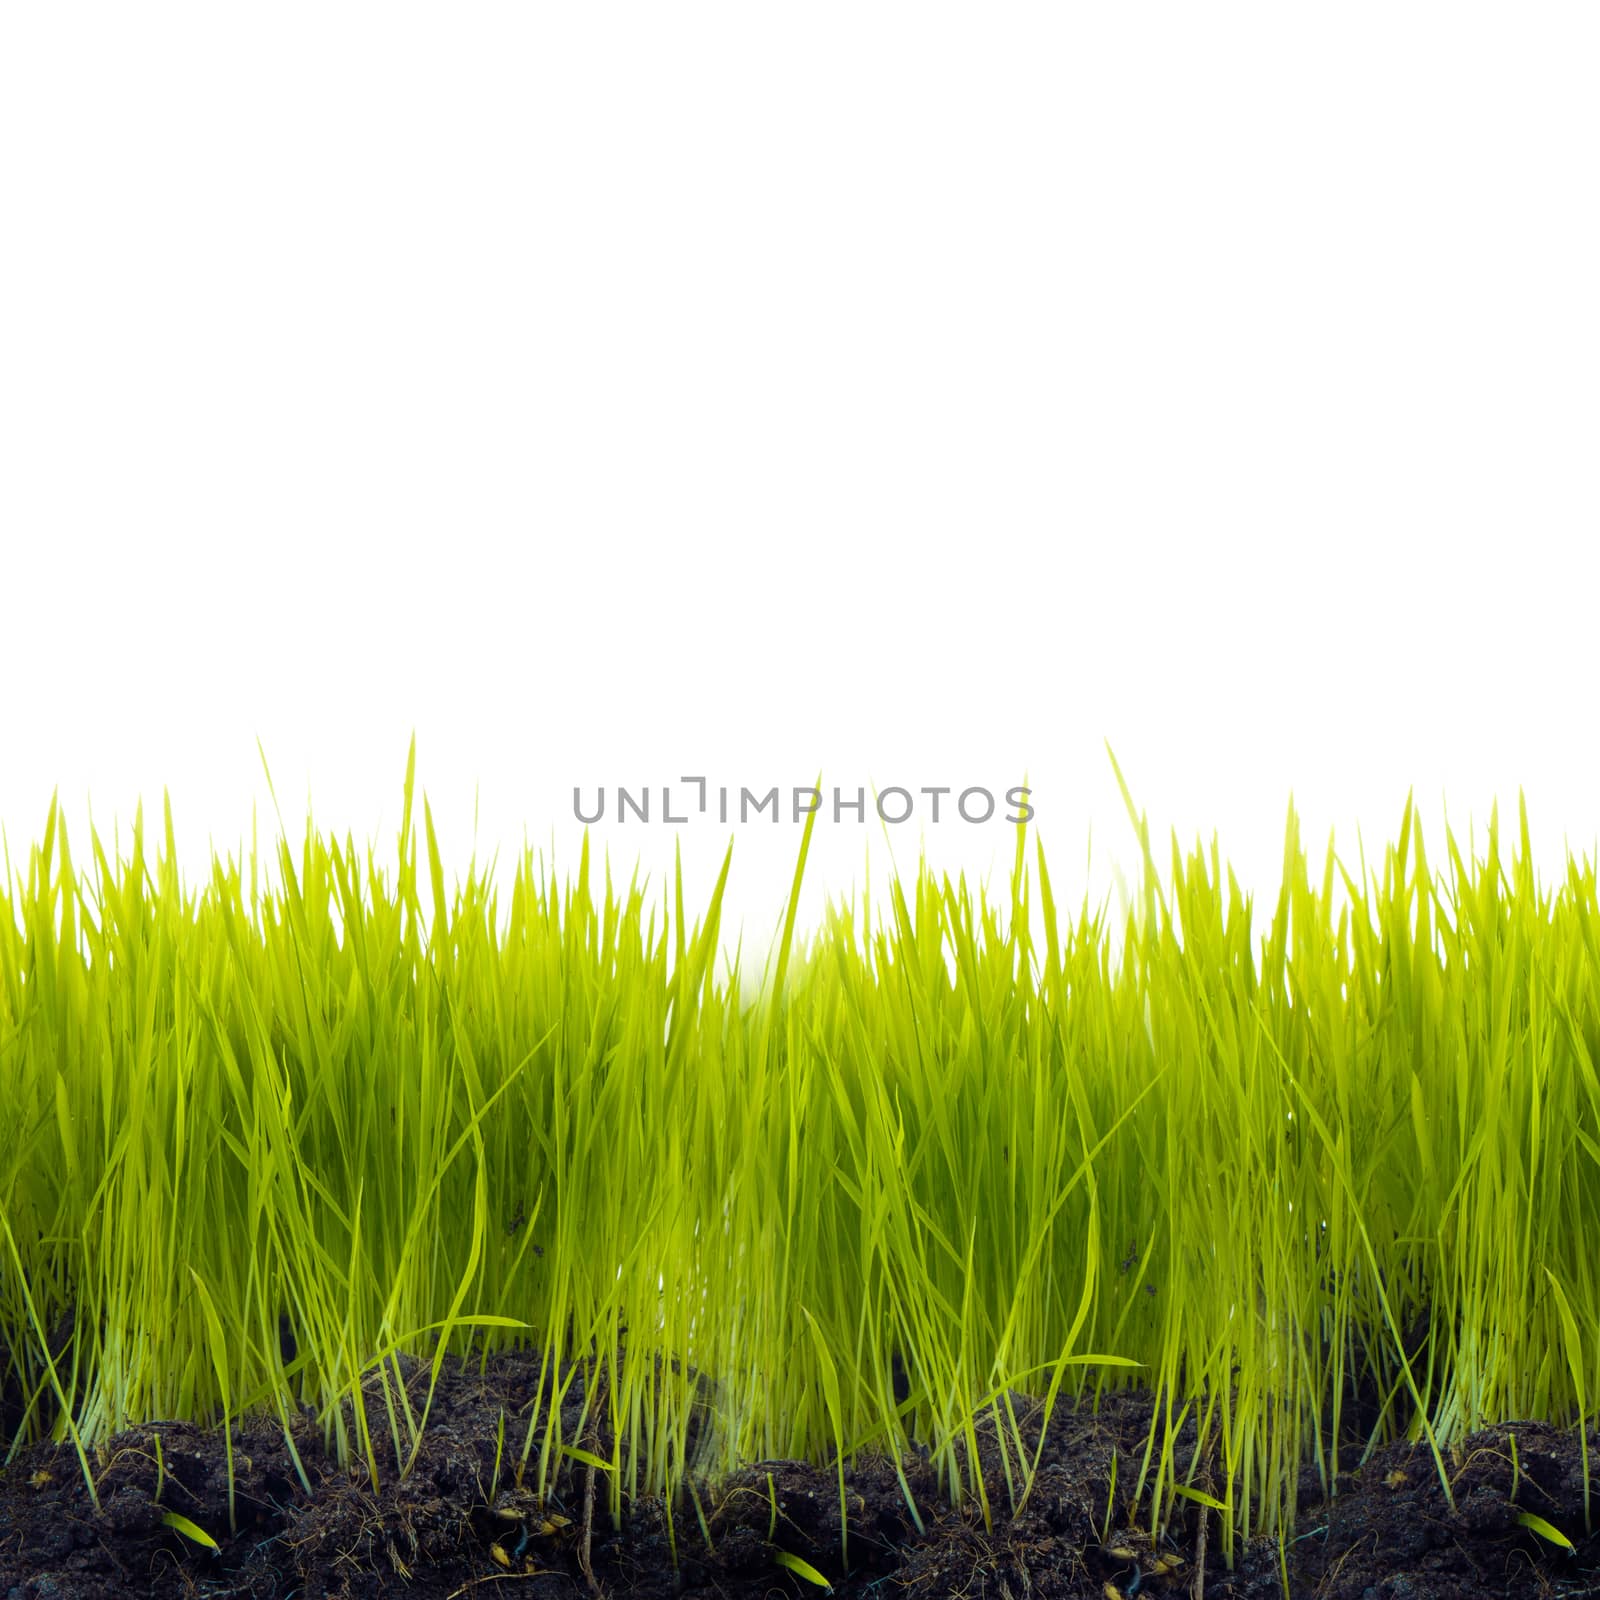 Grass with soil by wyoosumran